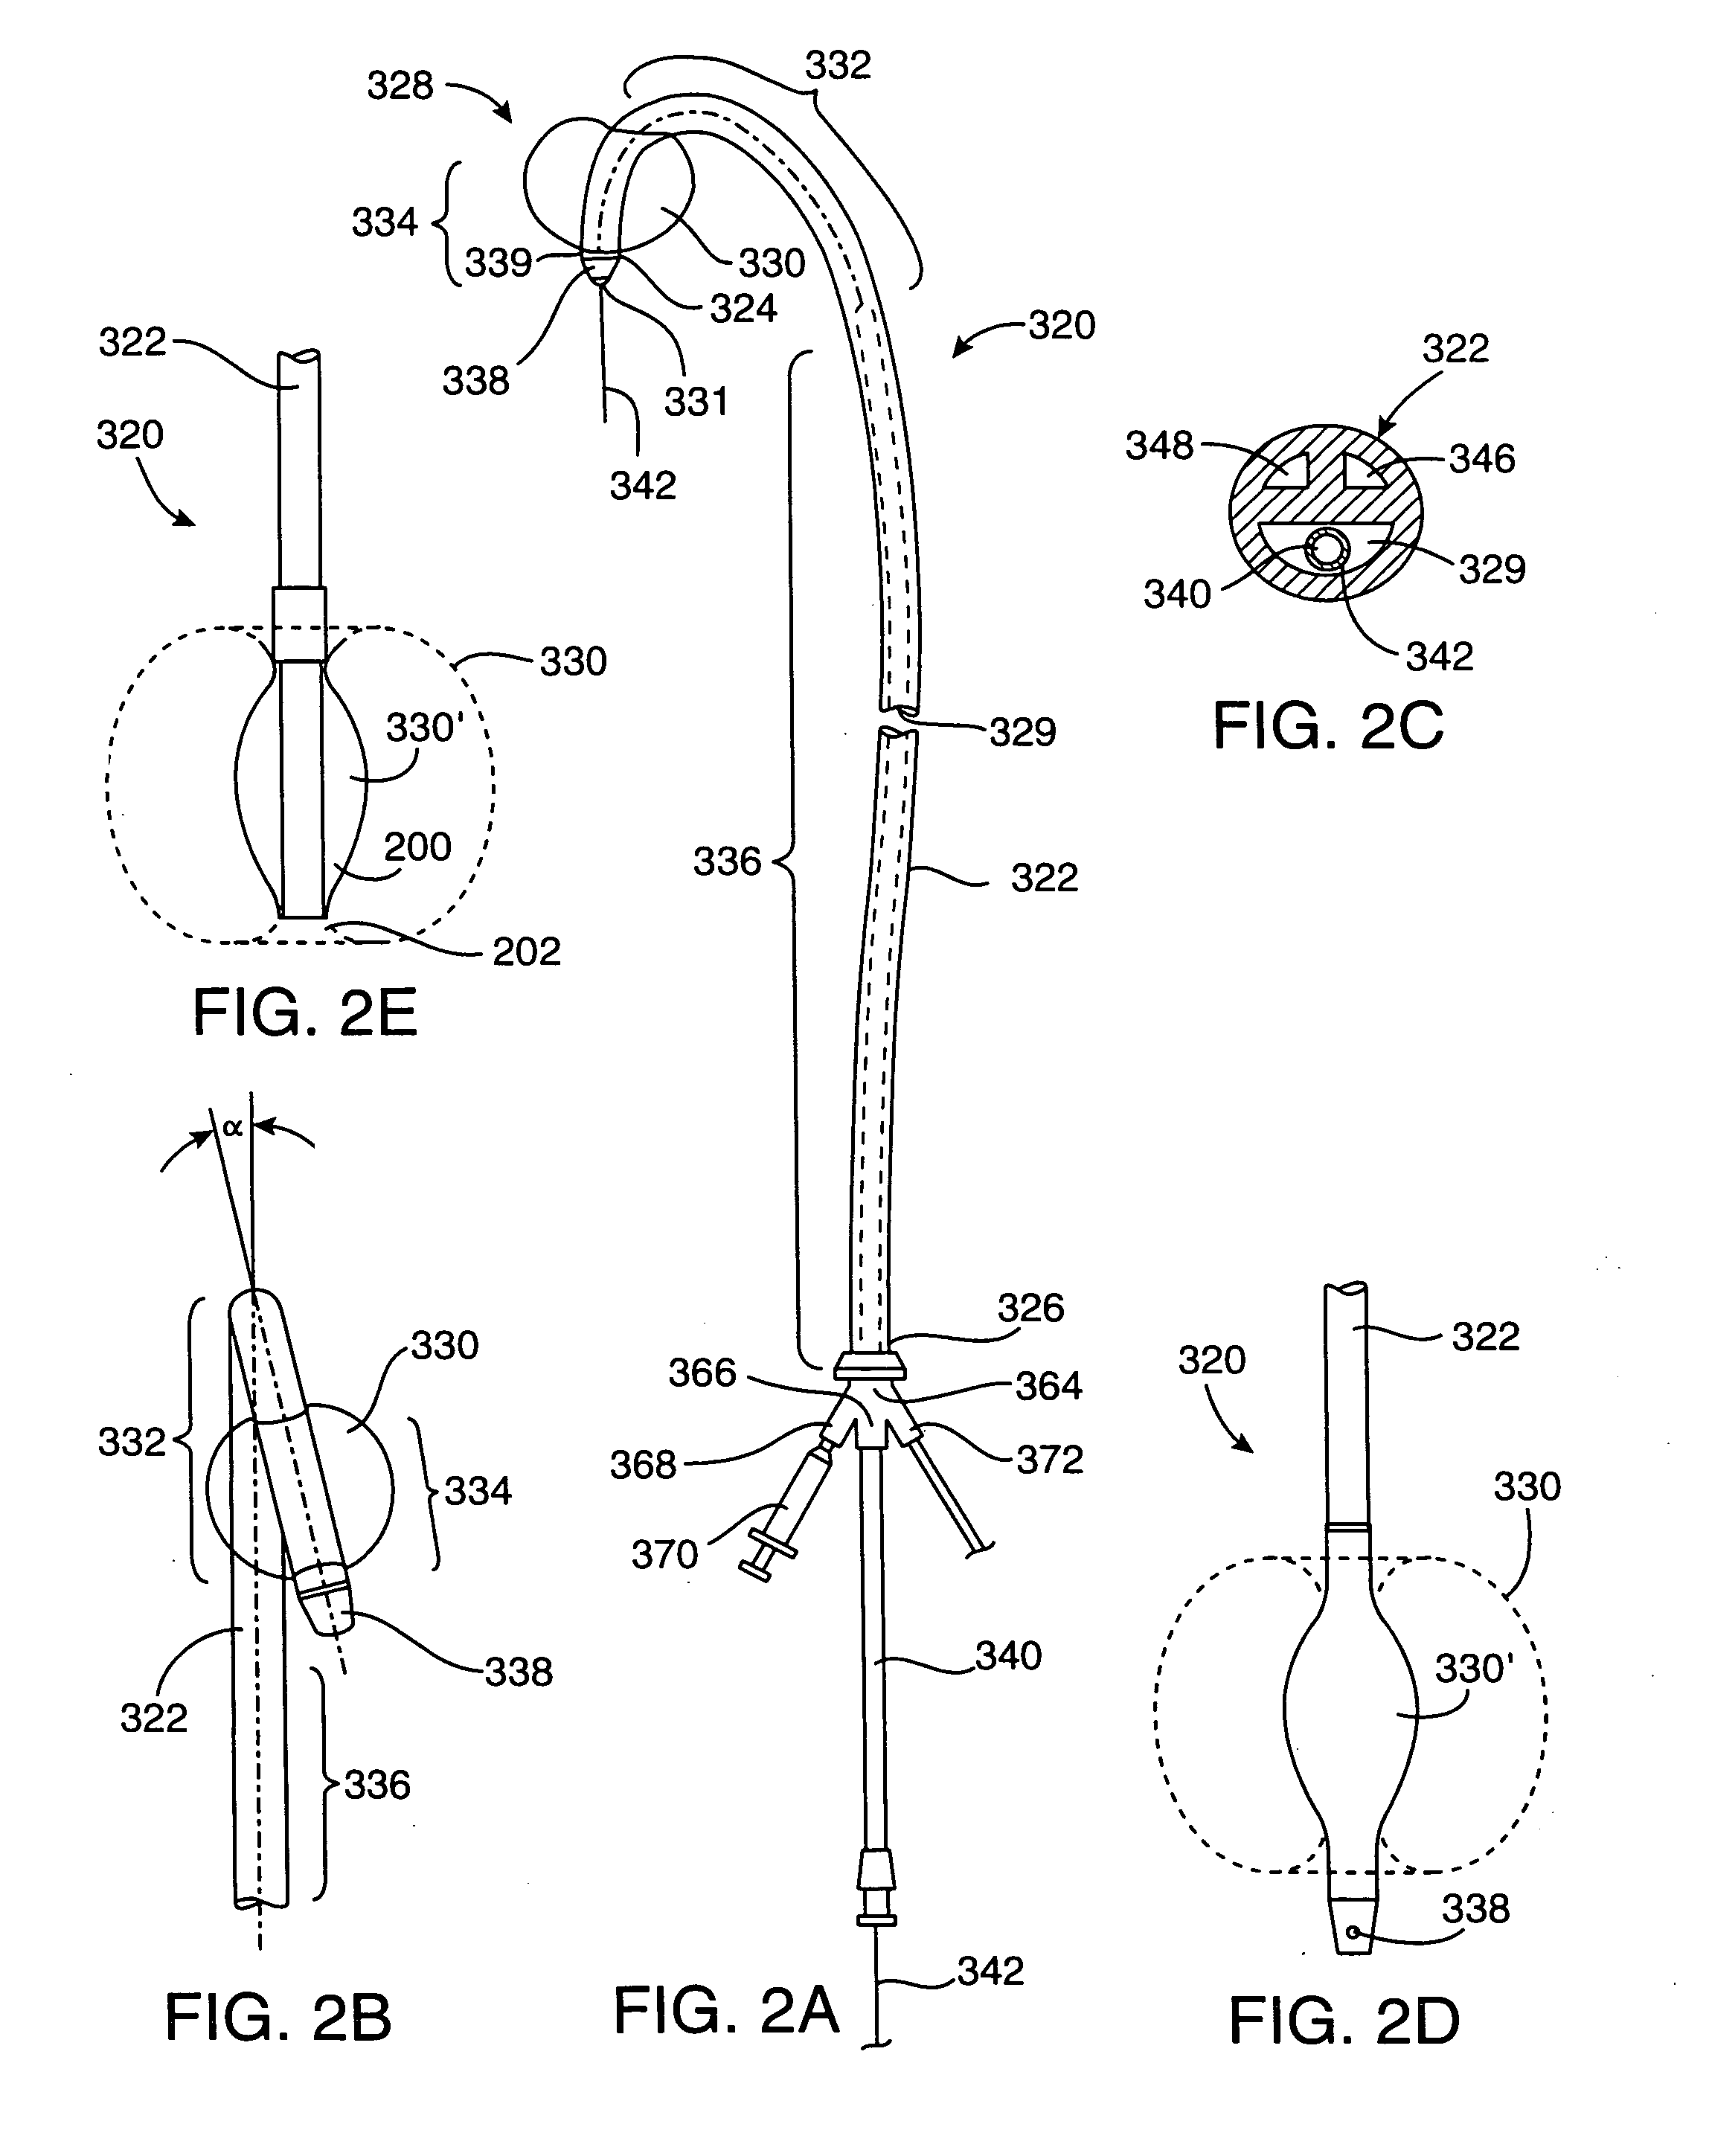 System and methods for performing endovascular procedures